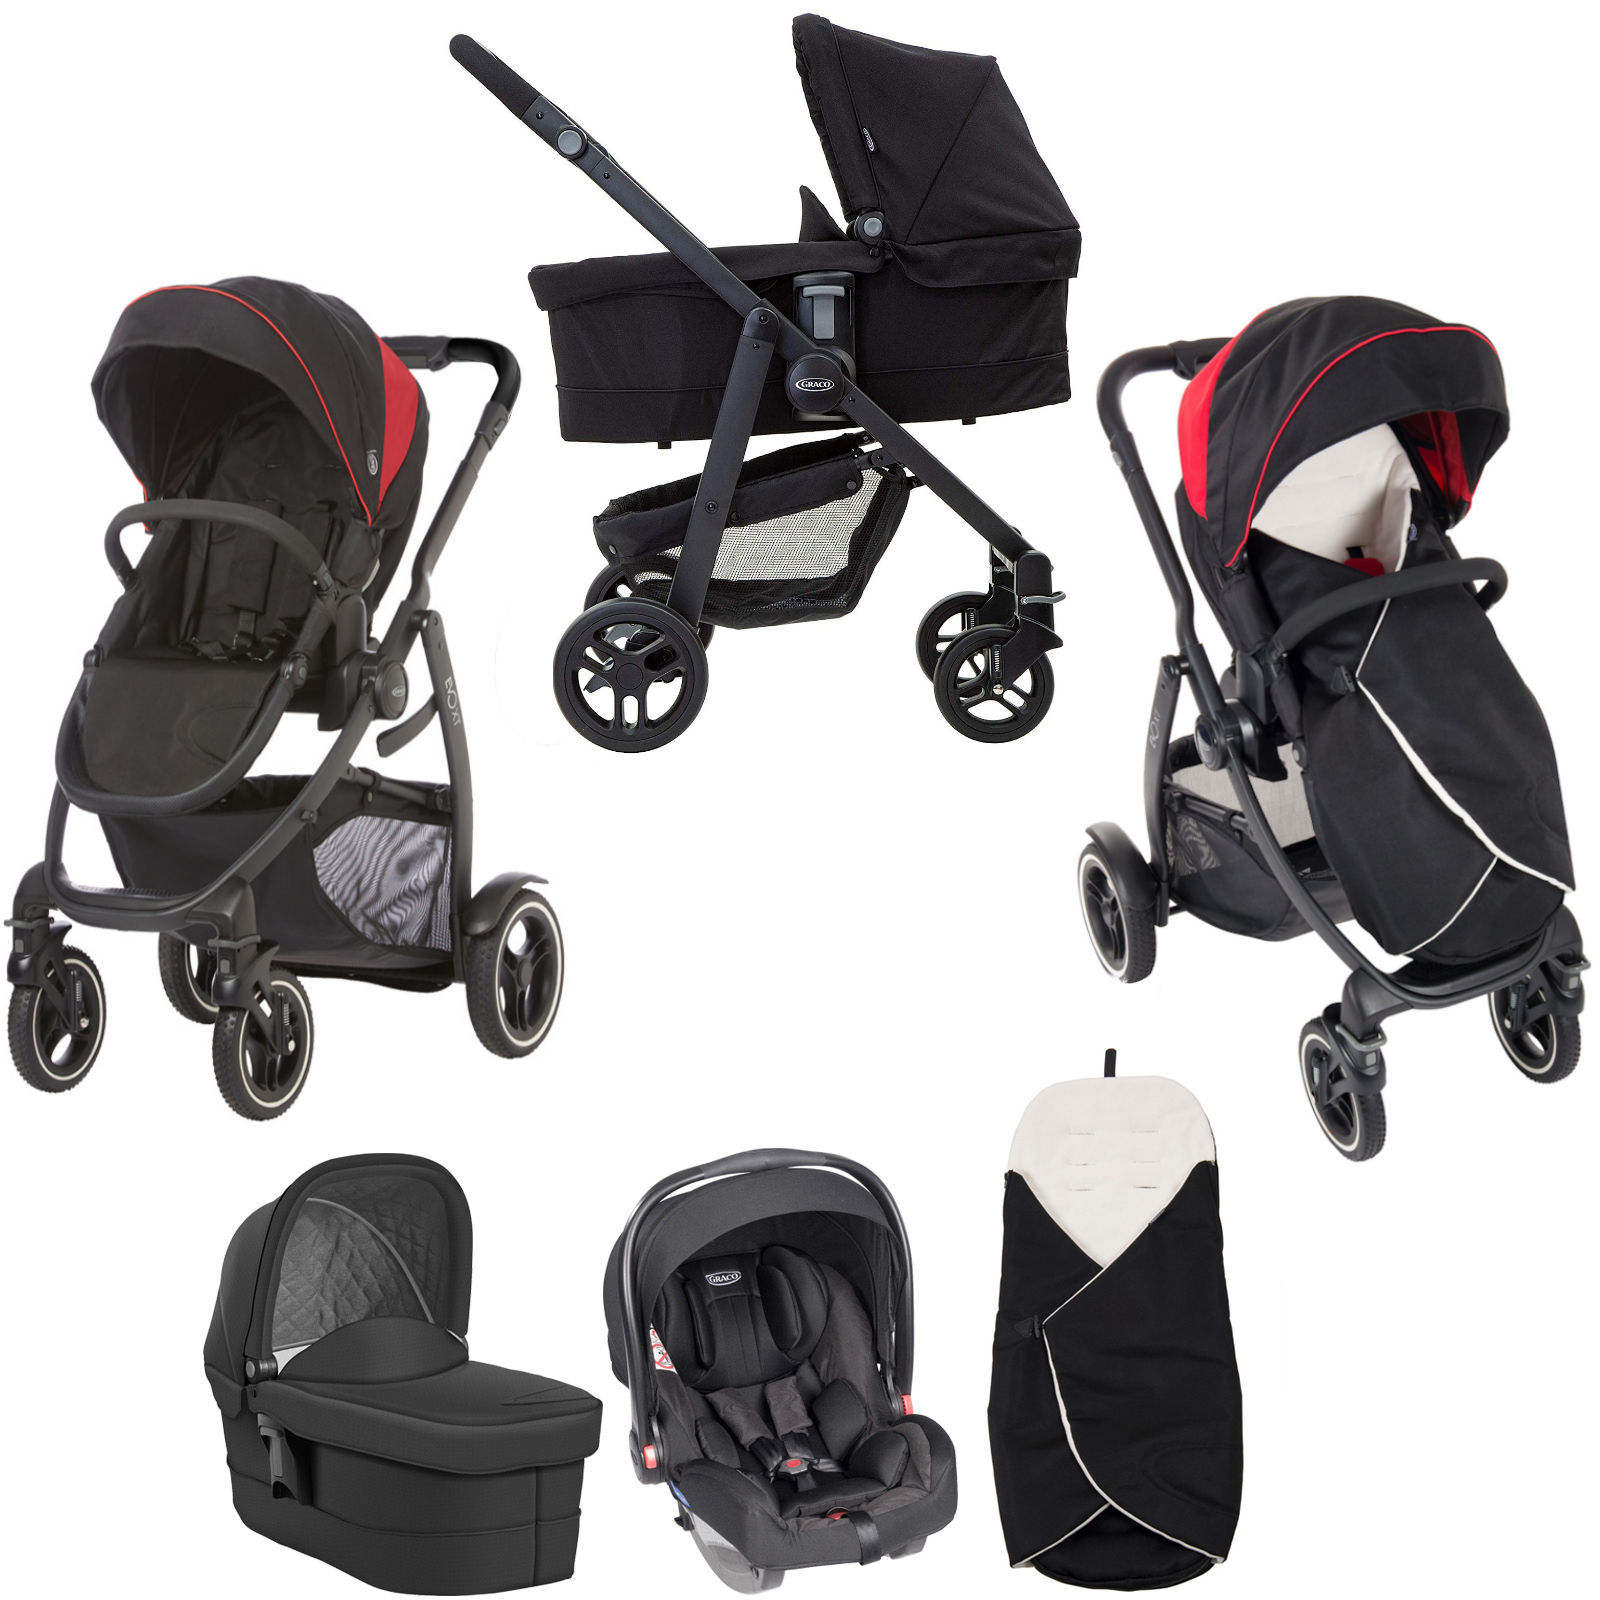 Graco Evo Xt Snugride Travel System Carrycot Black Red